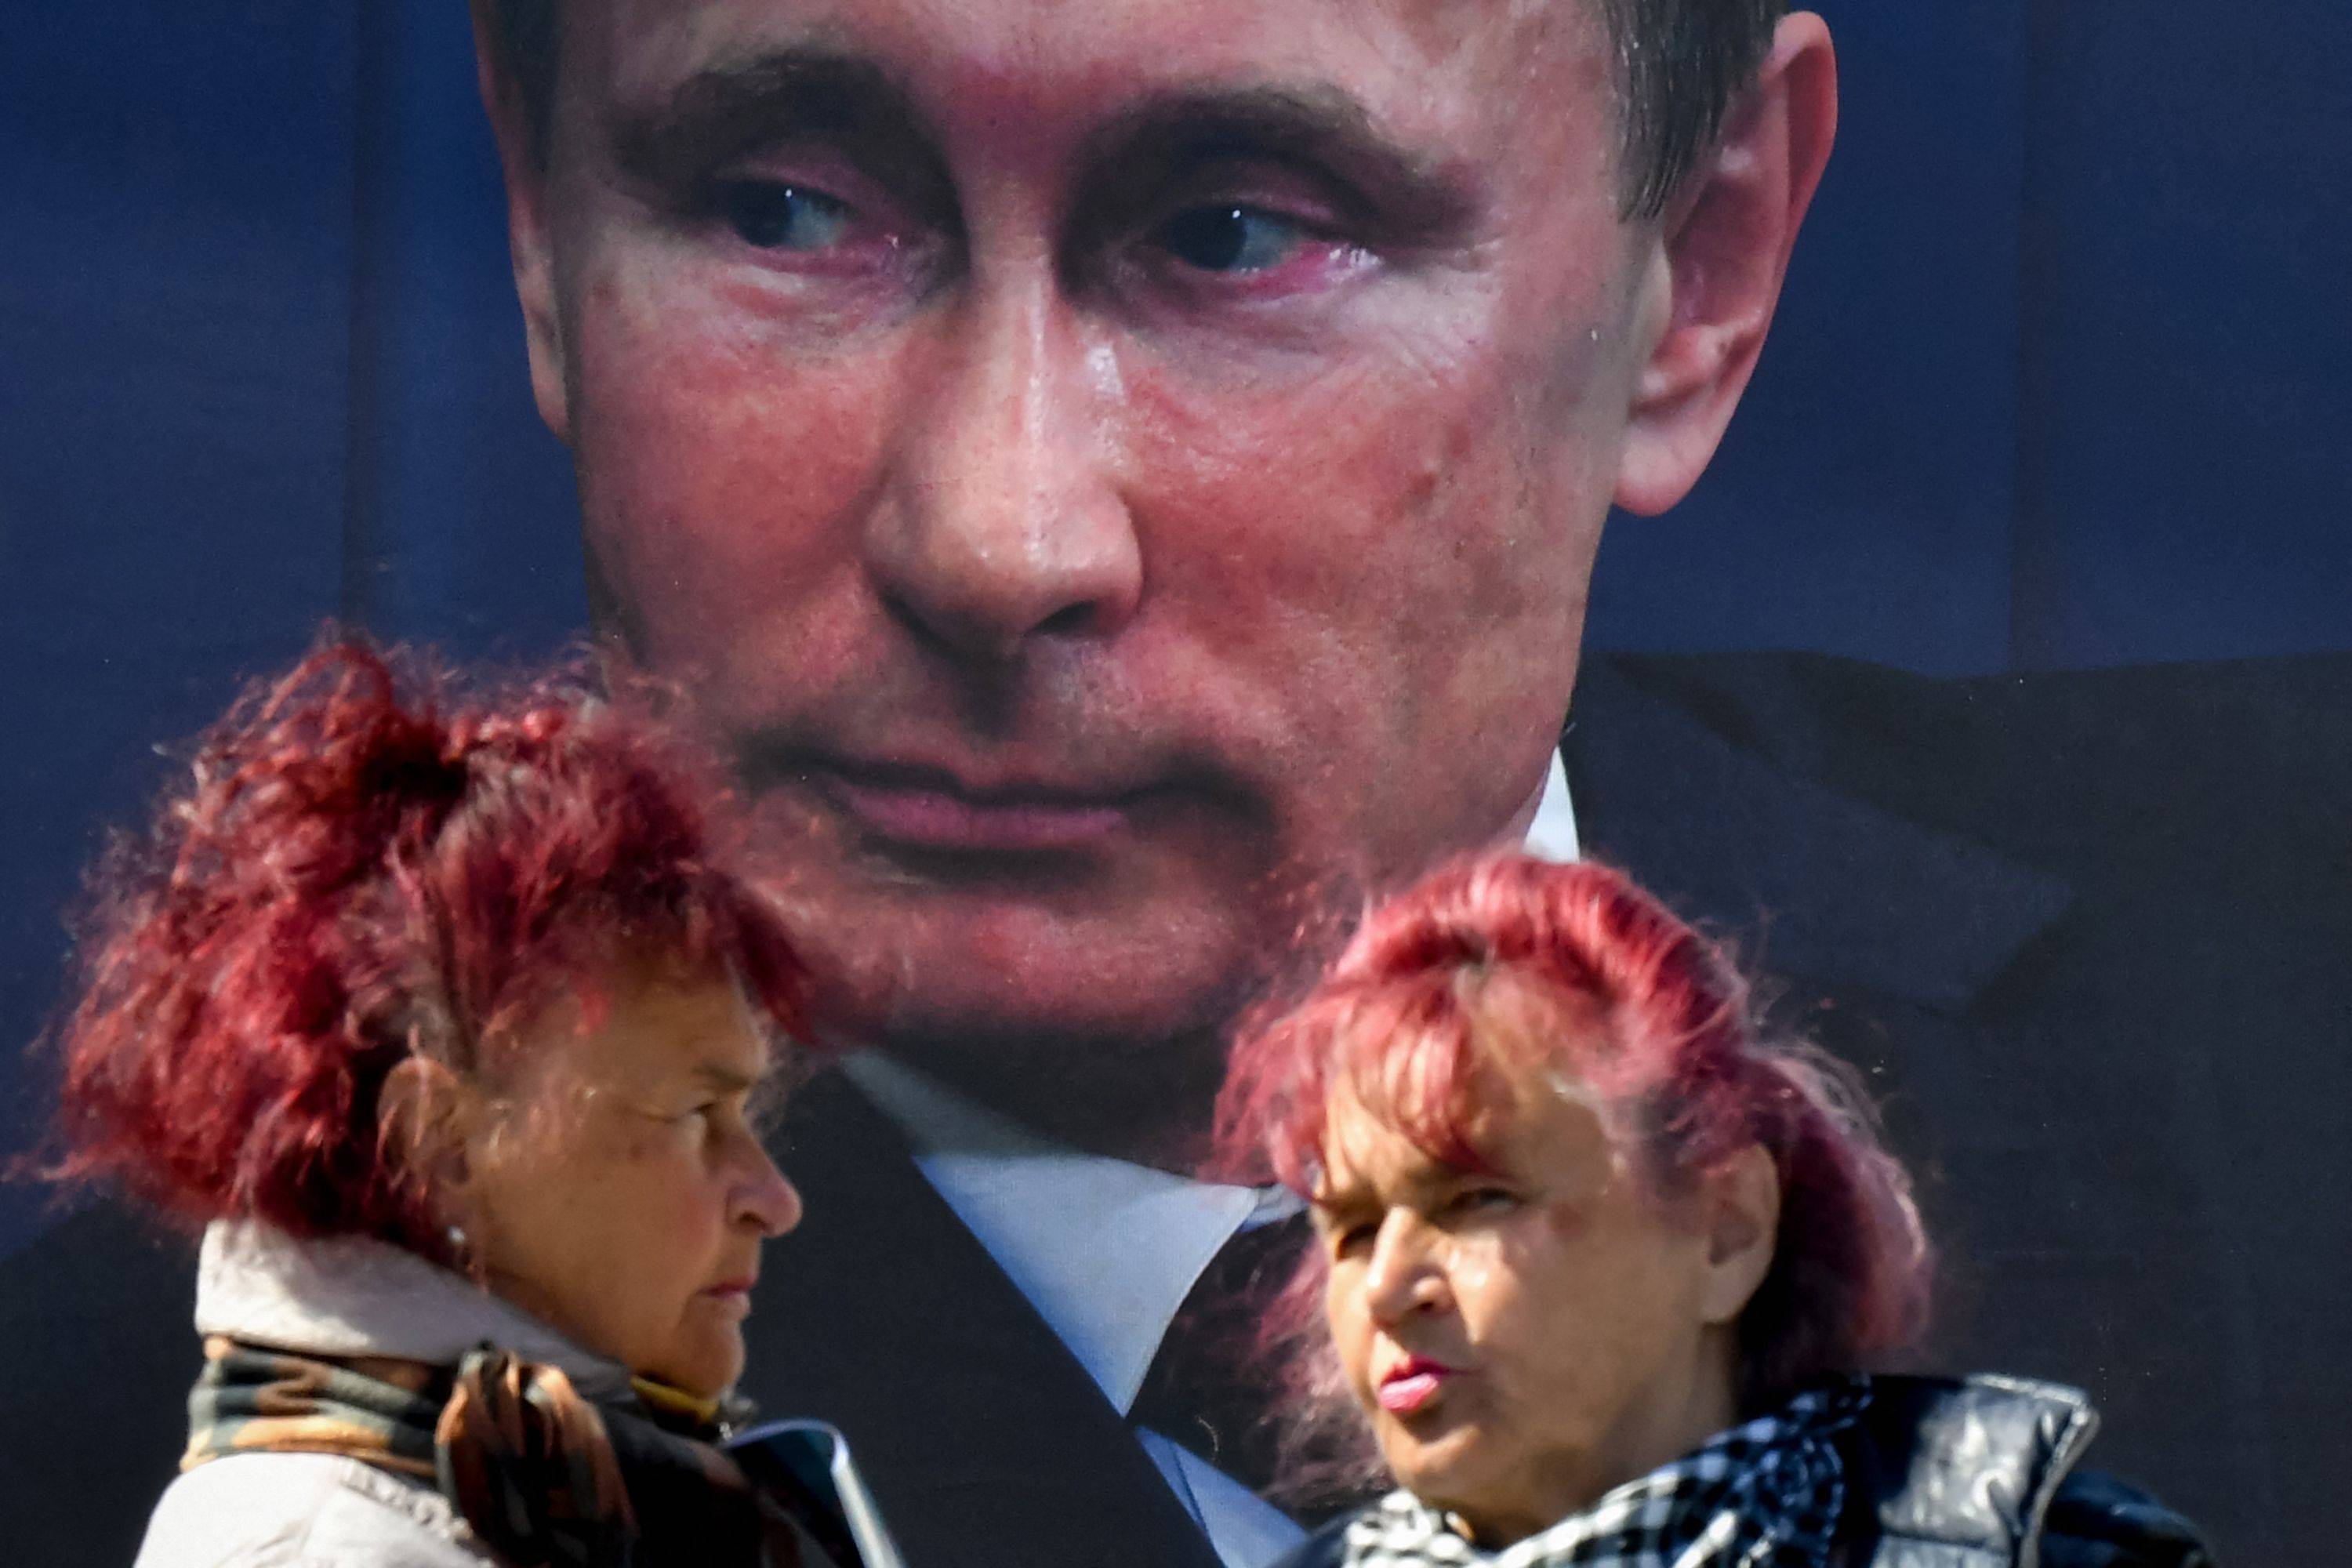 Fed up with the war and feeling powerless, Russians want Vladimir Putin to  end it - VoxEurop